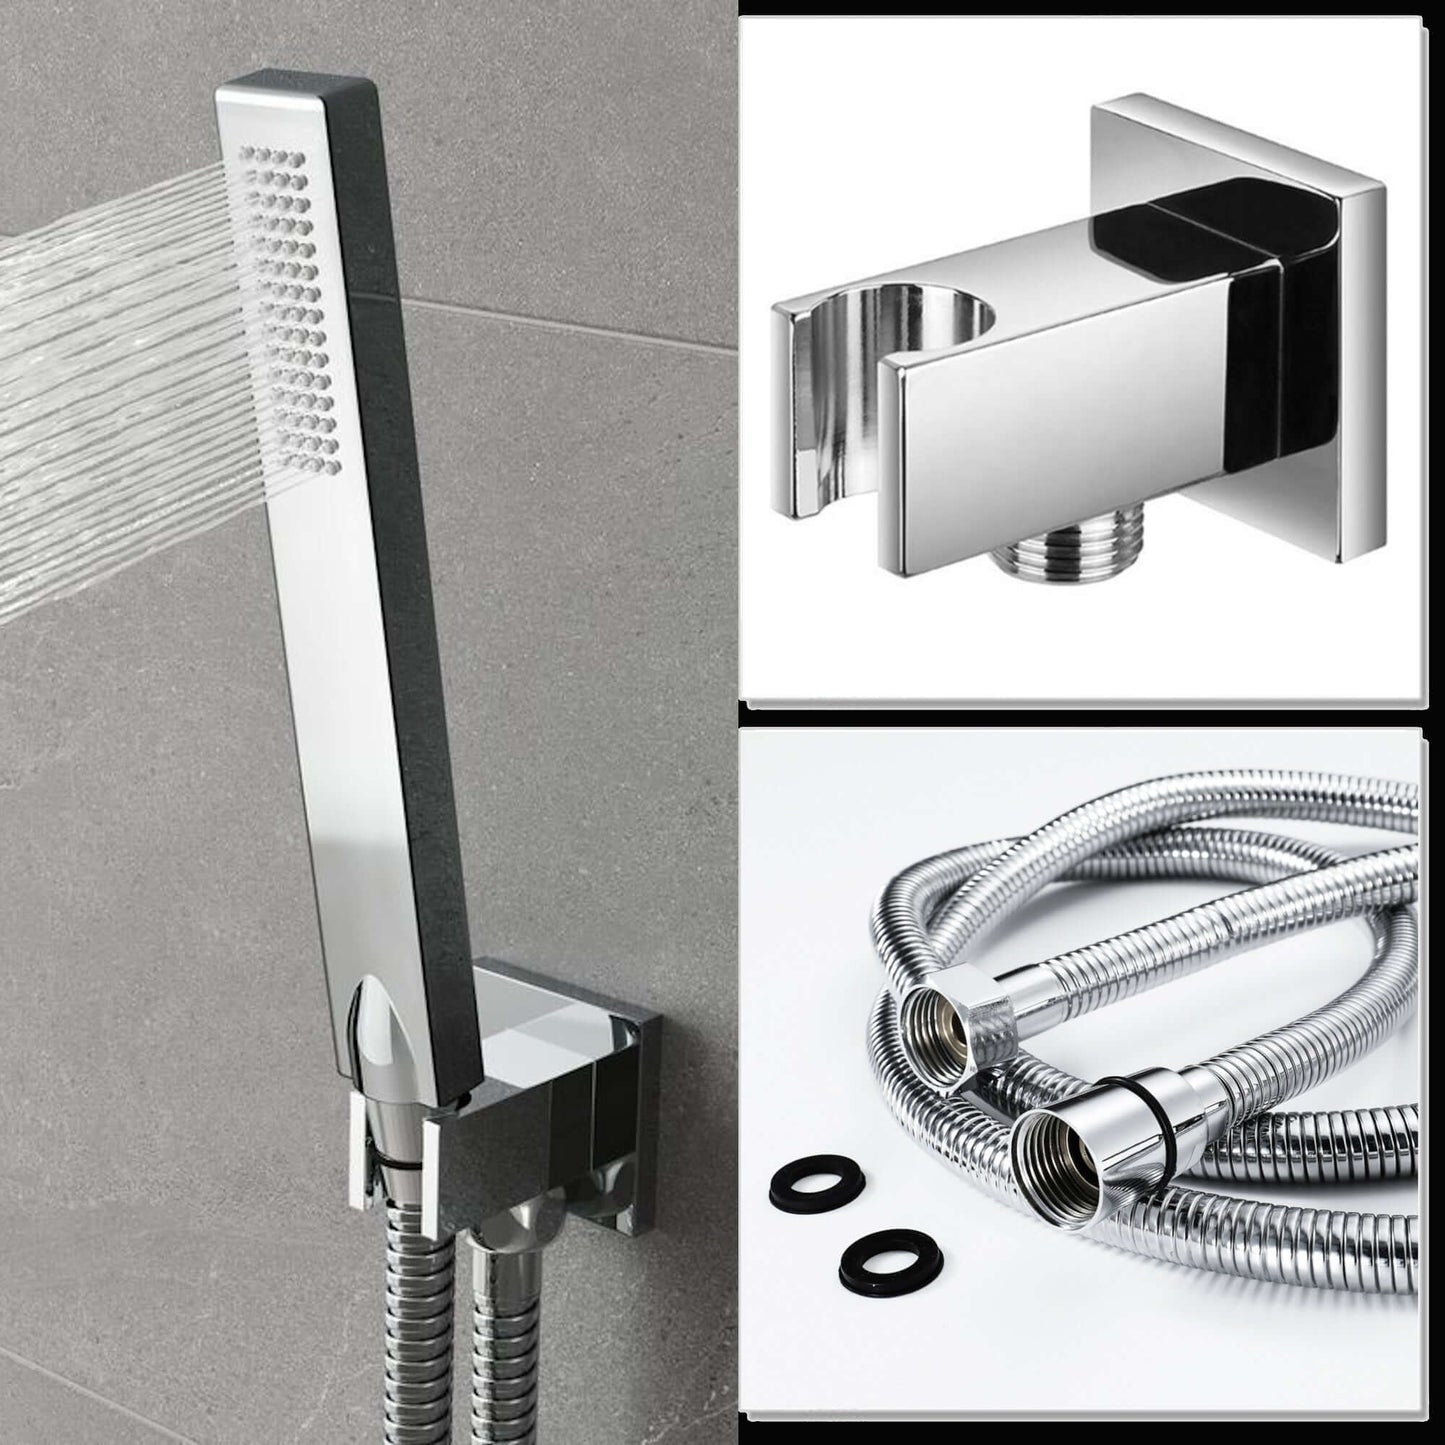 Premium Square Pencil Hand Shower With Silicone Jets Kit Incl. Hose And Wall Bracket With Outlet - Chrome